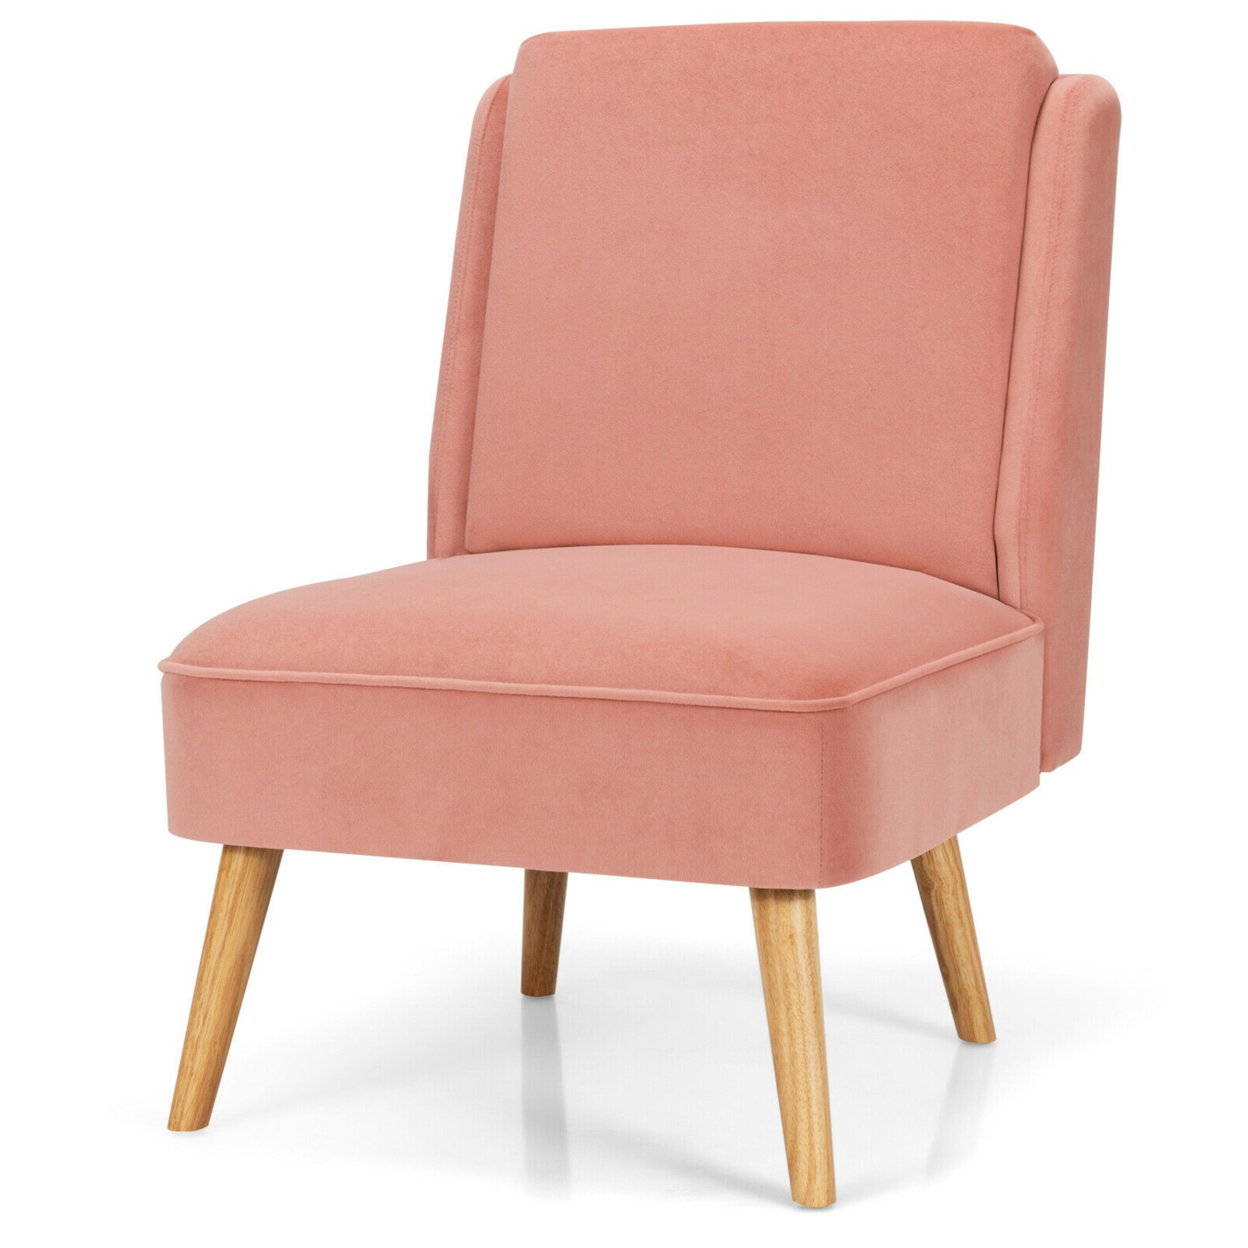 Velvet Accent Chair Single Sofa Chair Leisure Chair With Wood Frame Pink